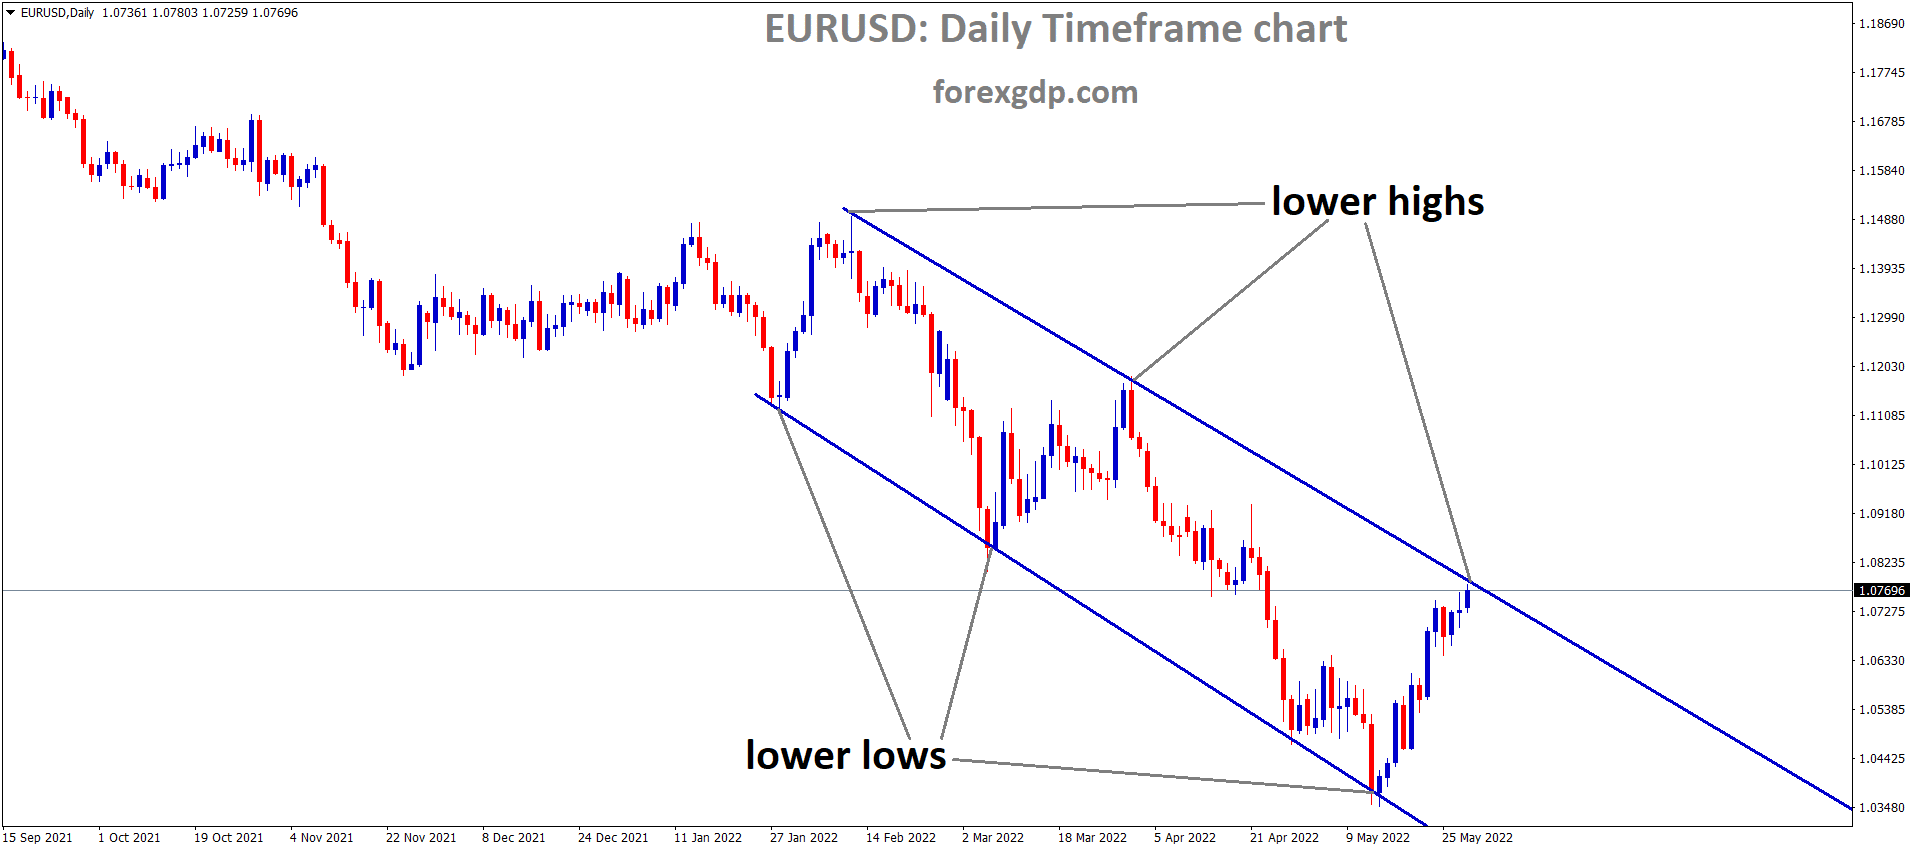 EURUSD Daily Time Frame Analysis Market is moving in the Descending channel and the Market has reached the Lower high area of the channel